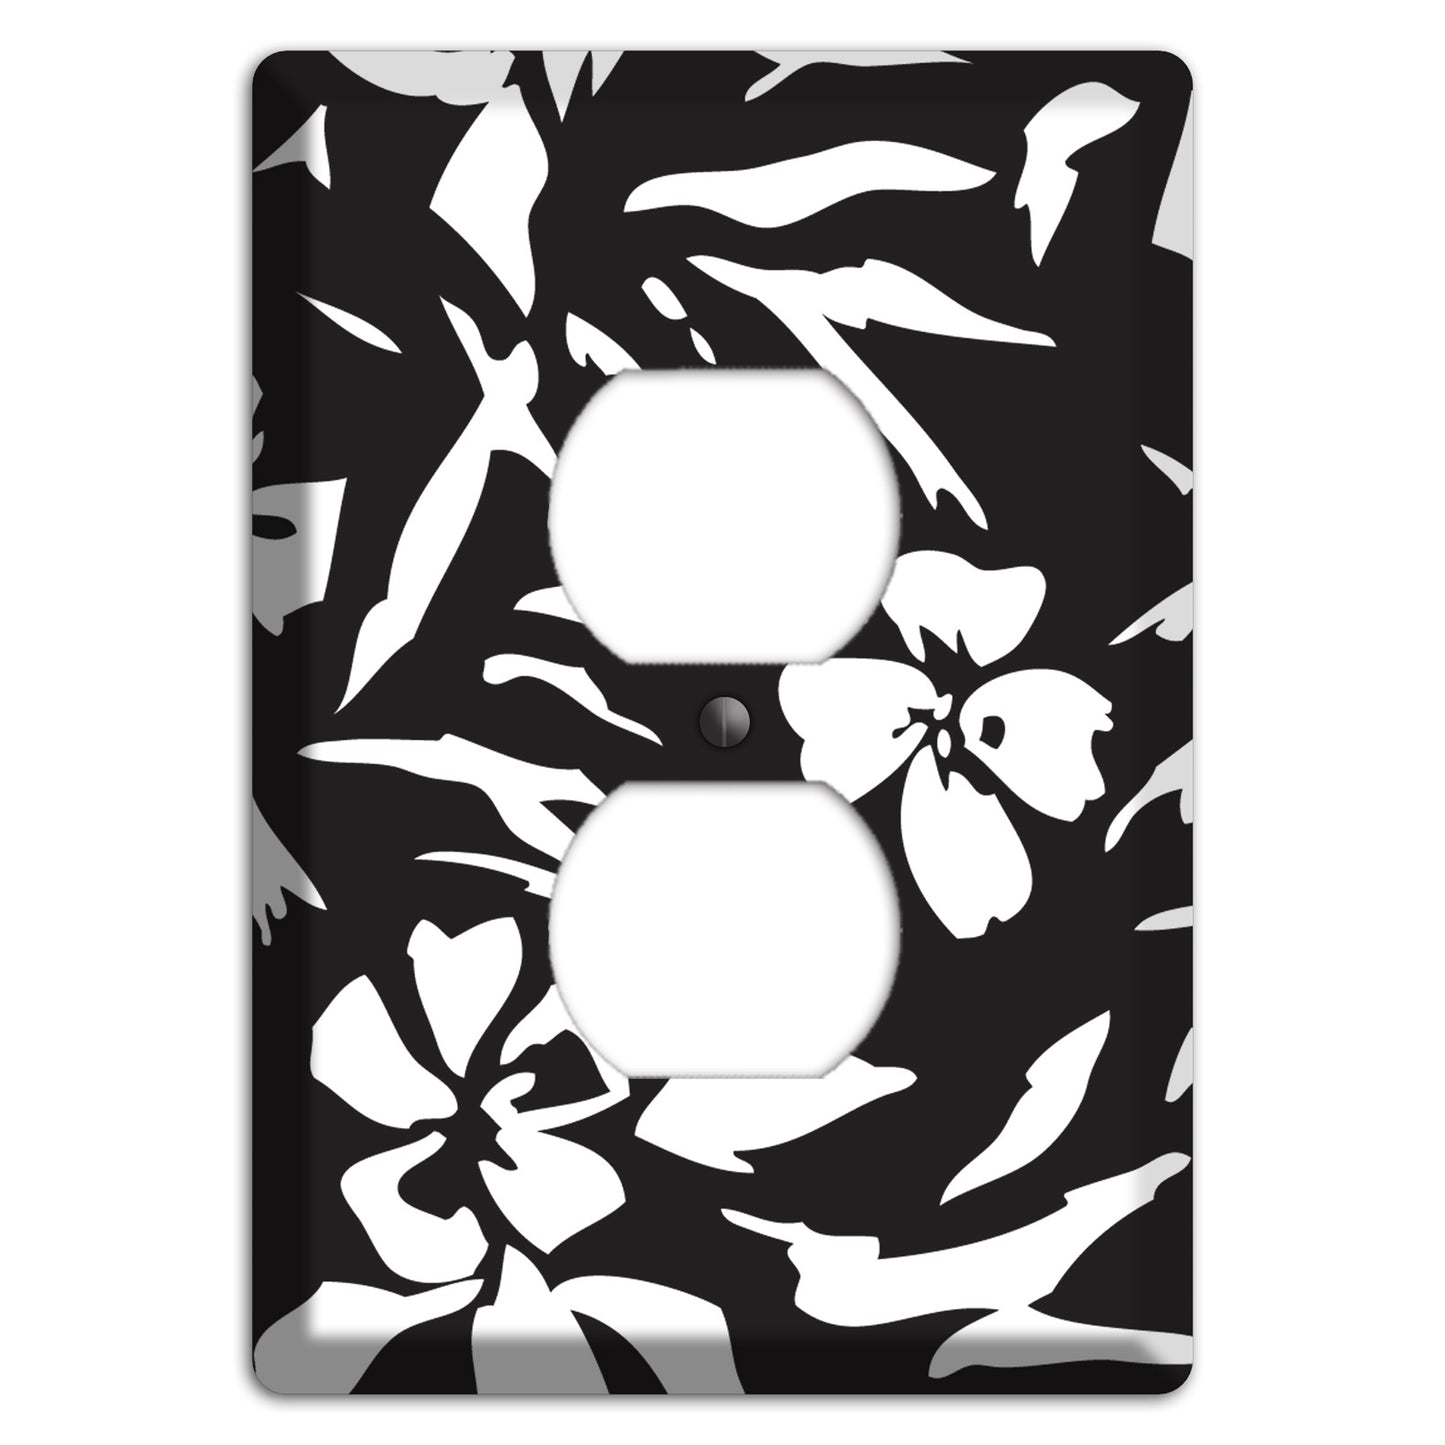 Black with White Woodcut Floral Duplex Outlet Wallplate